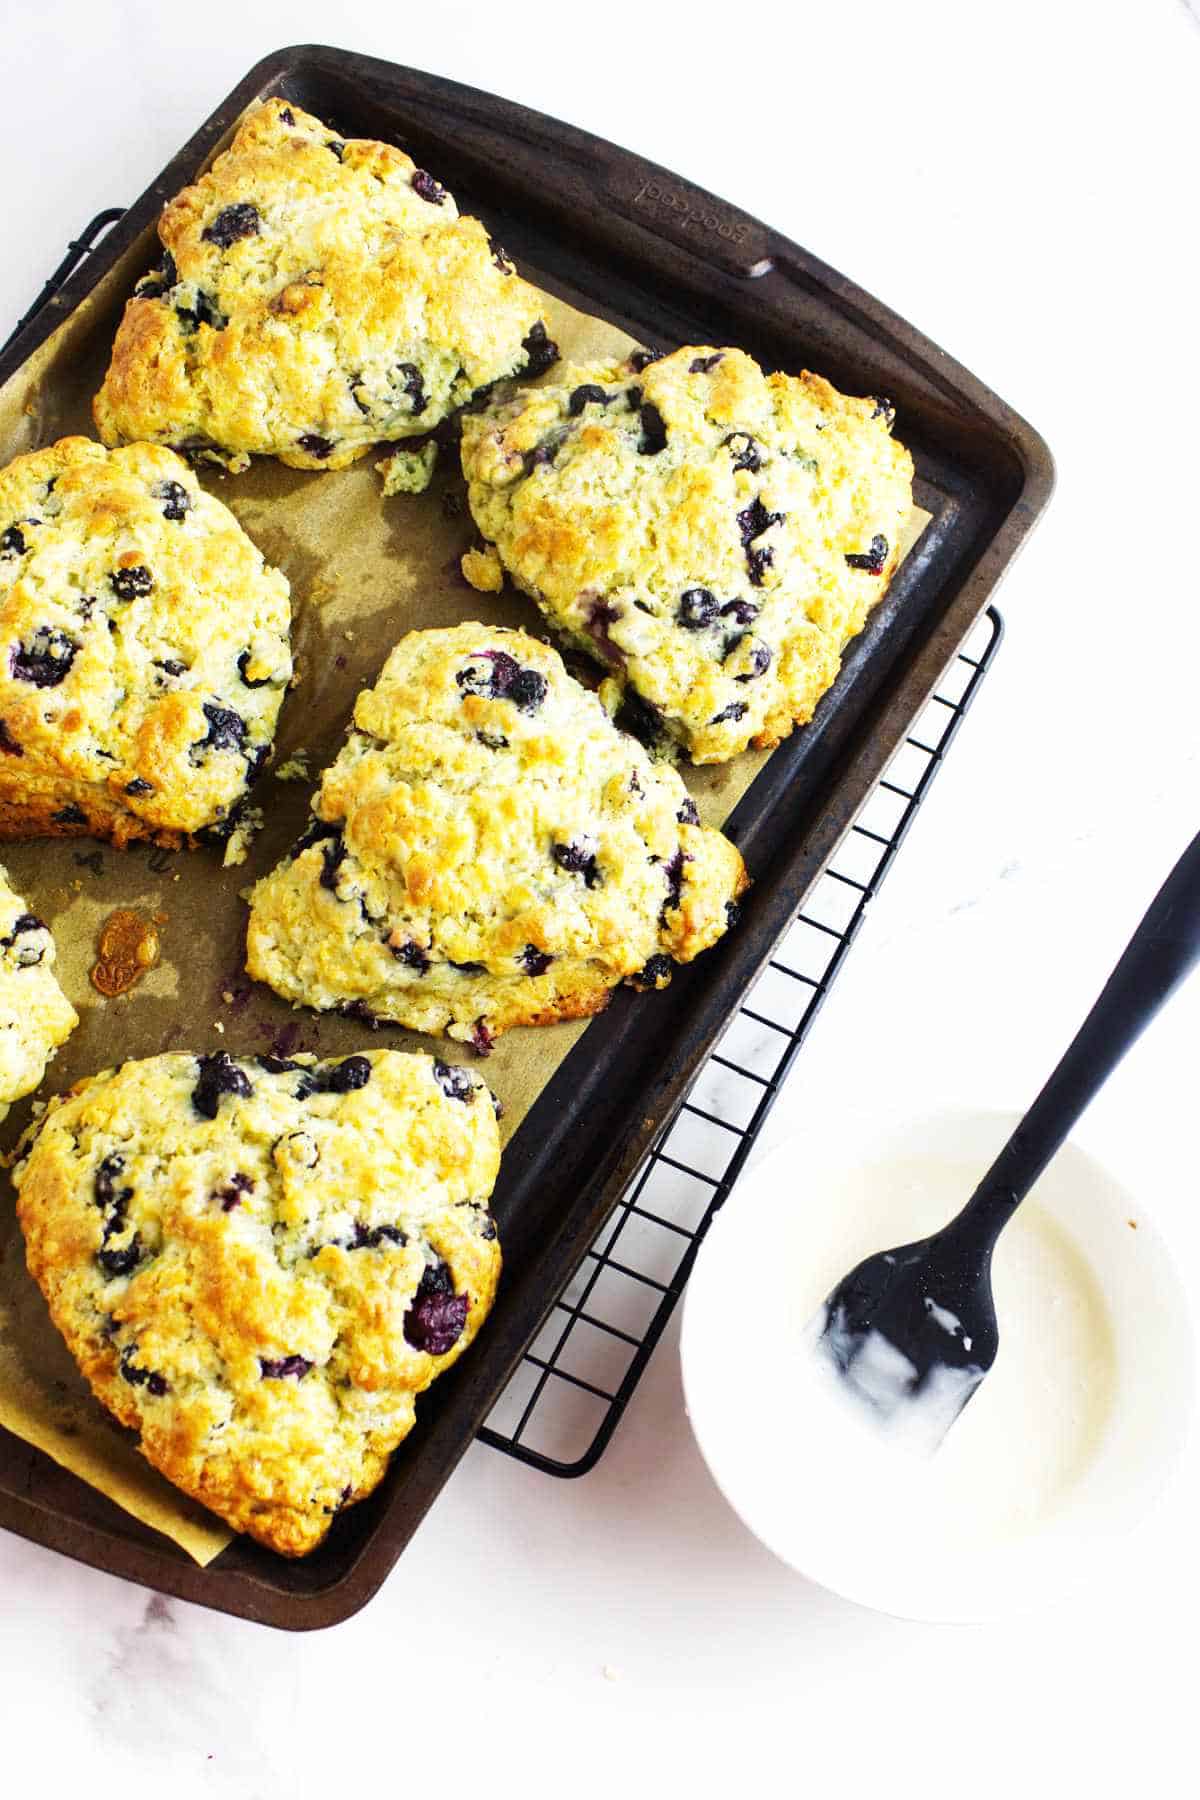 baking sheet of golden brown blueberry scones and a bowl of icing.